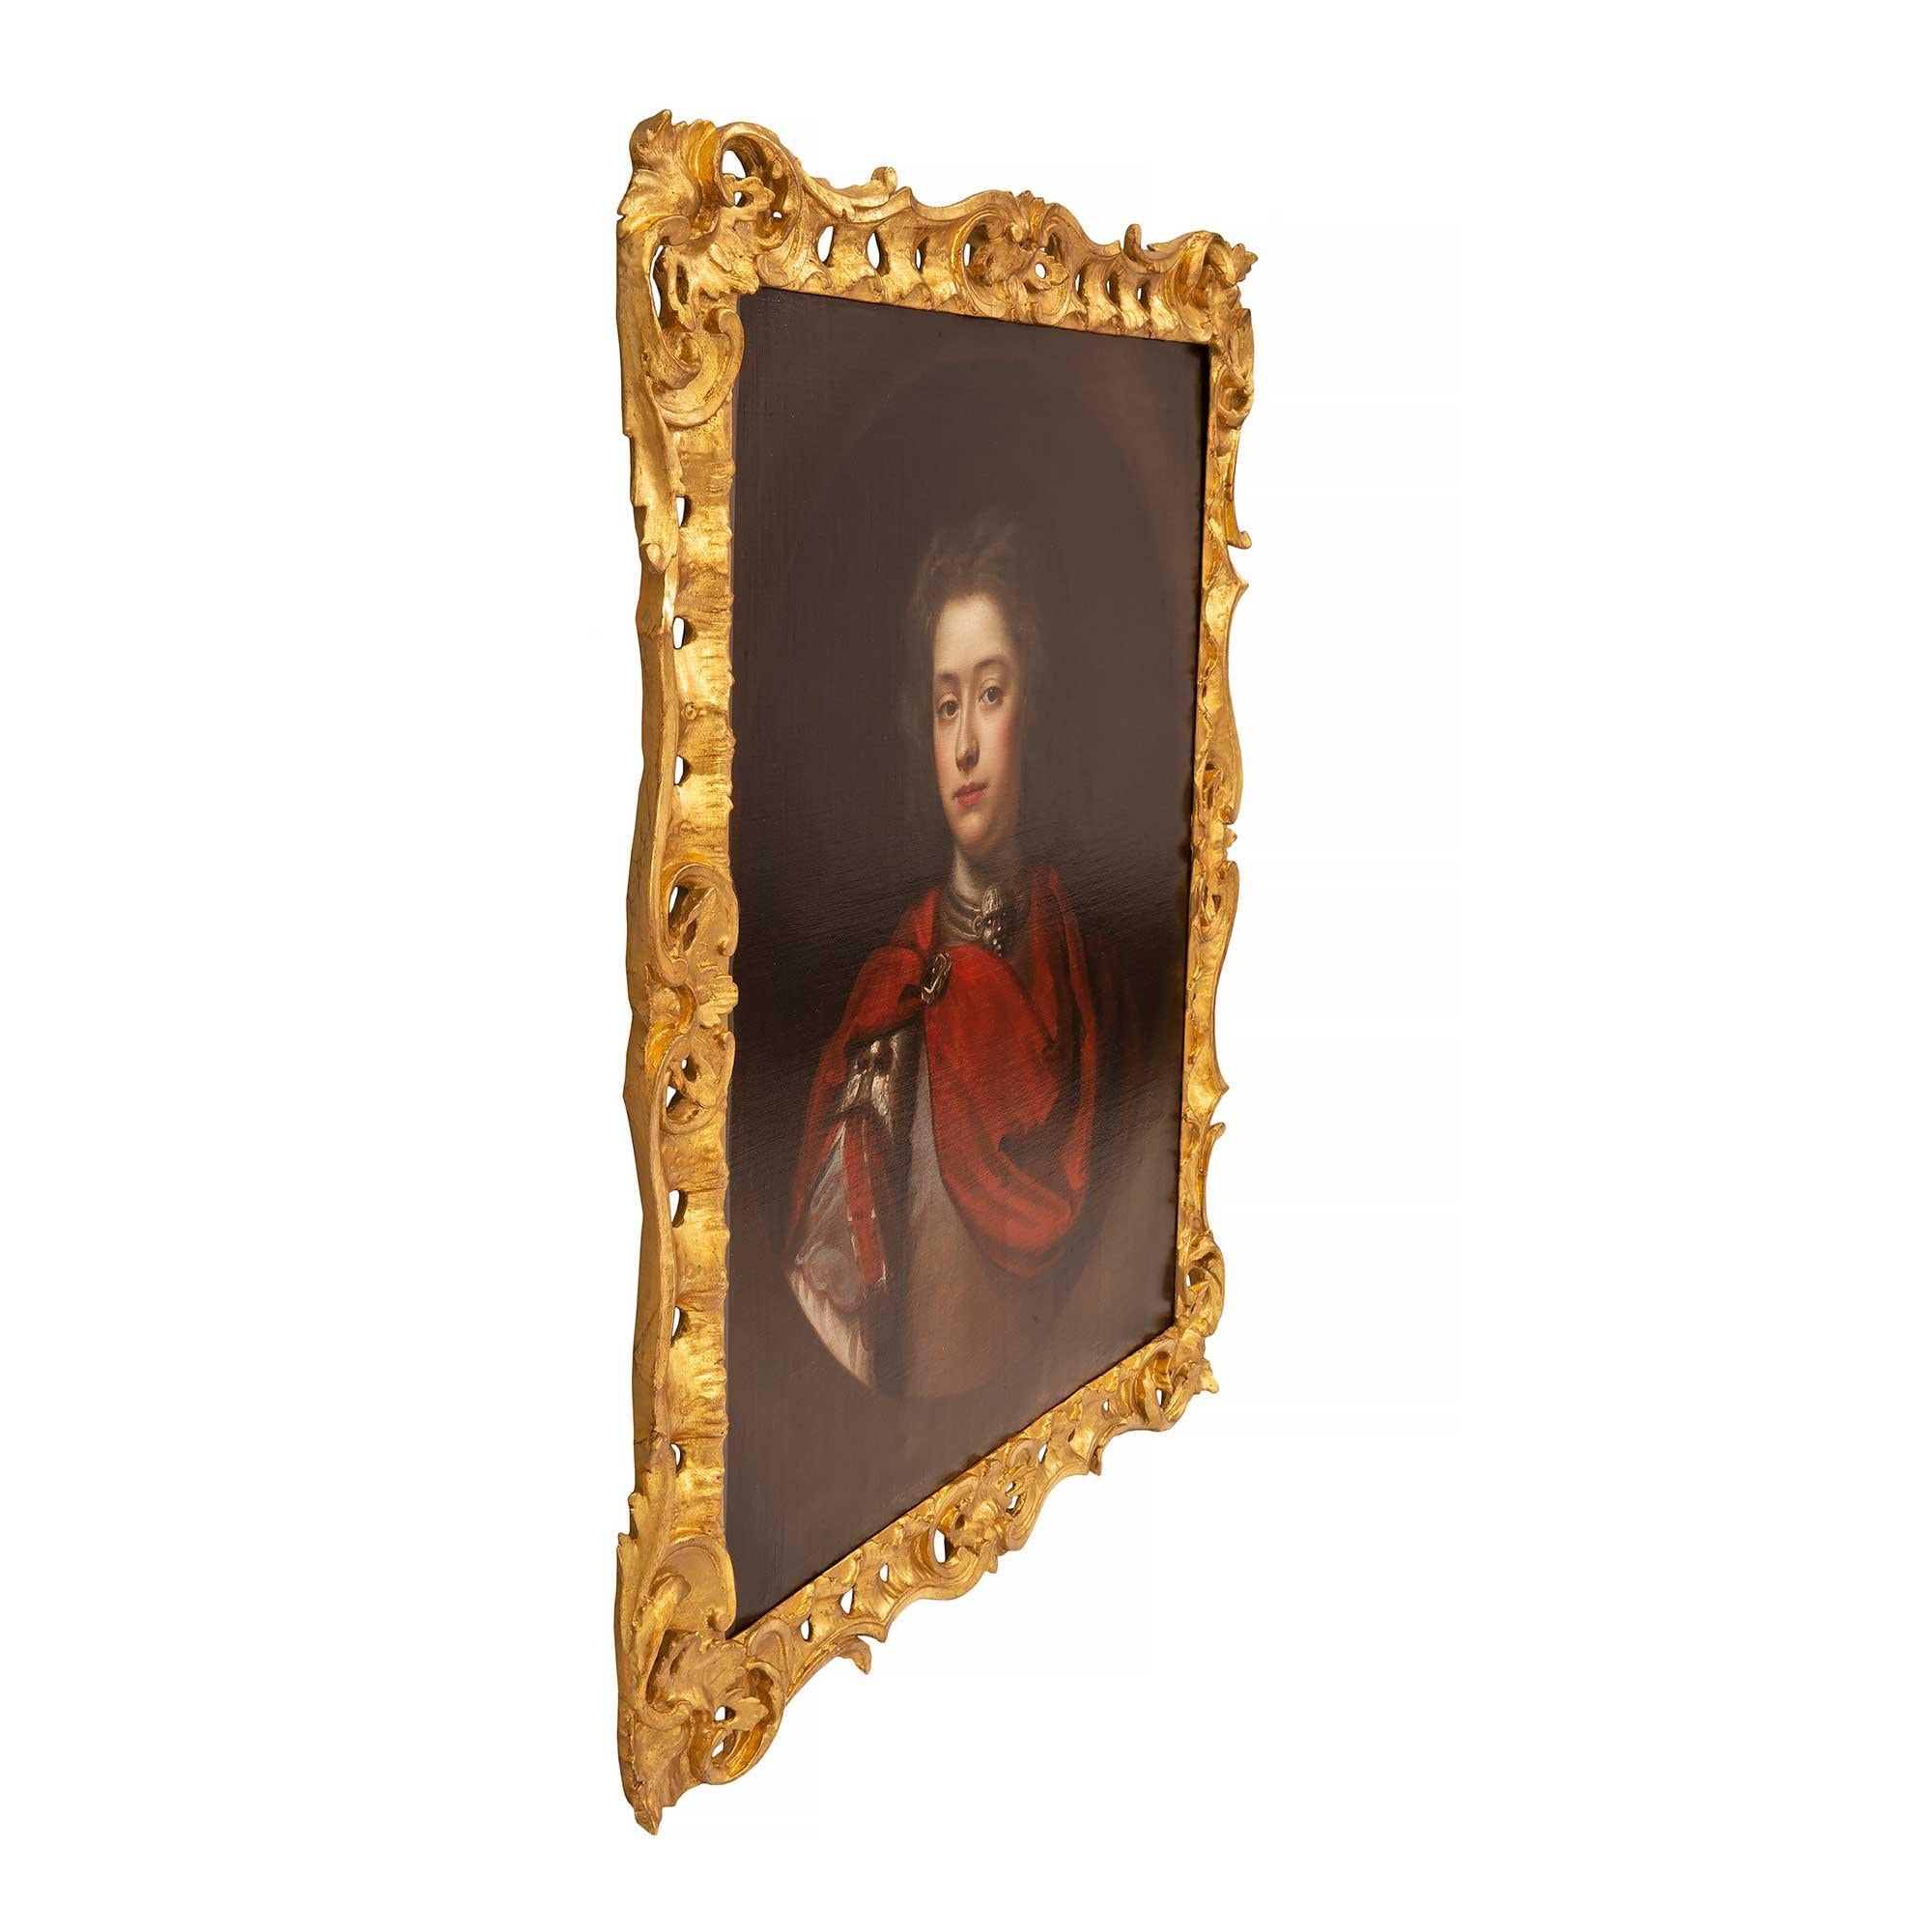 A lovely English early 19th century oil on canvas within a fine giltwood frame. The painting depicts a young nobleman in armor and draped in a red cape. He wears a pauldron and a fine necklace. Framed within an elegant foliate pierced giltwood